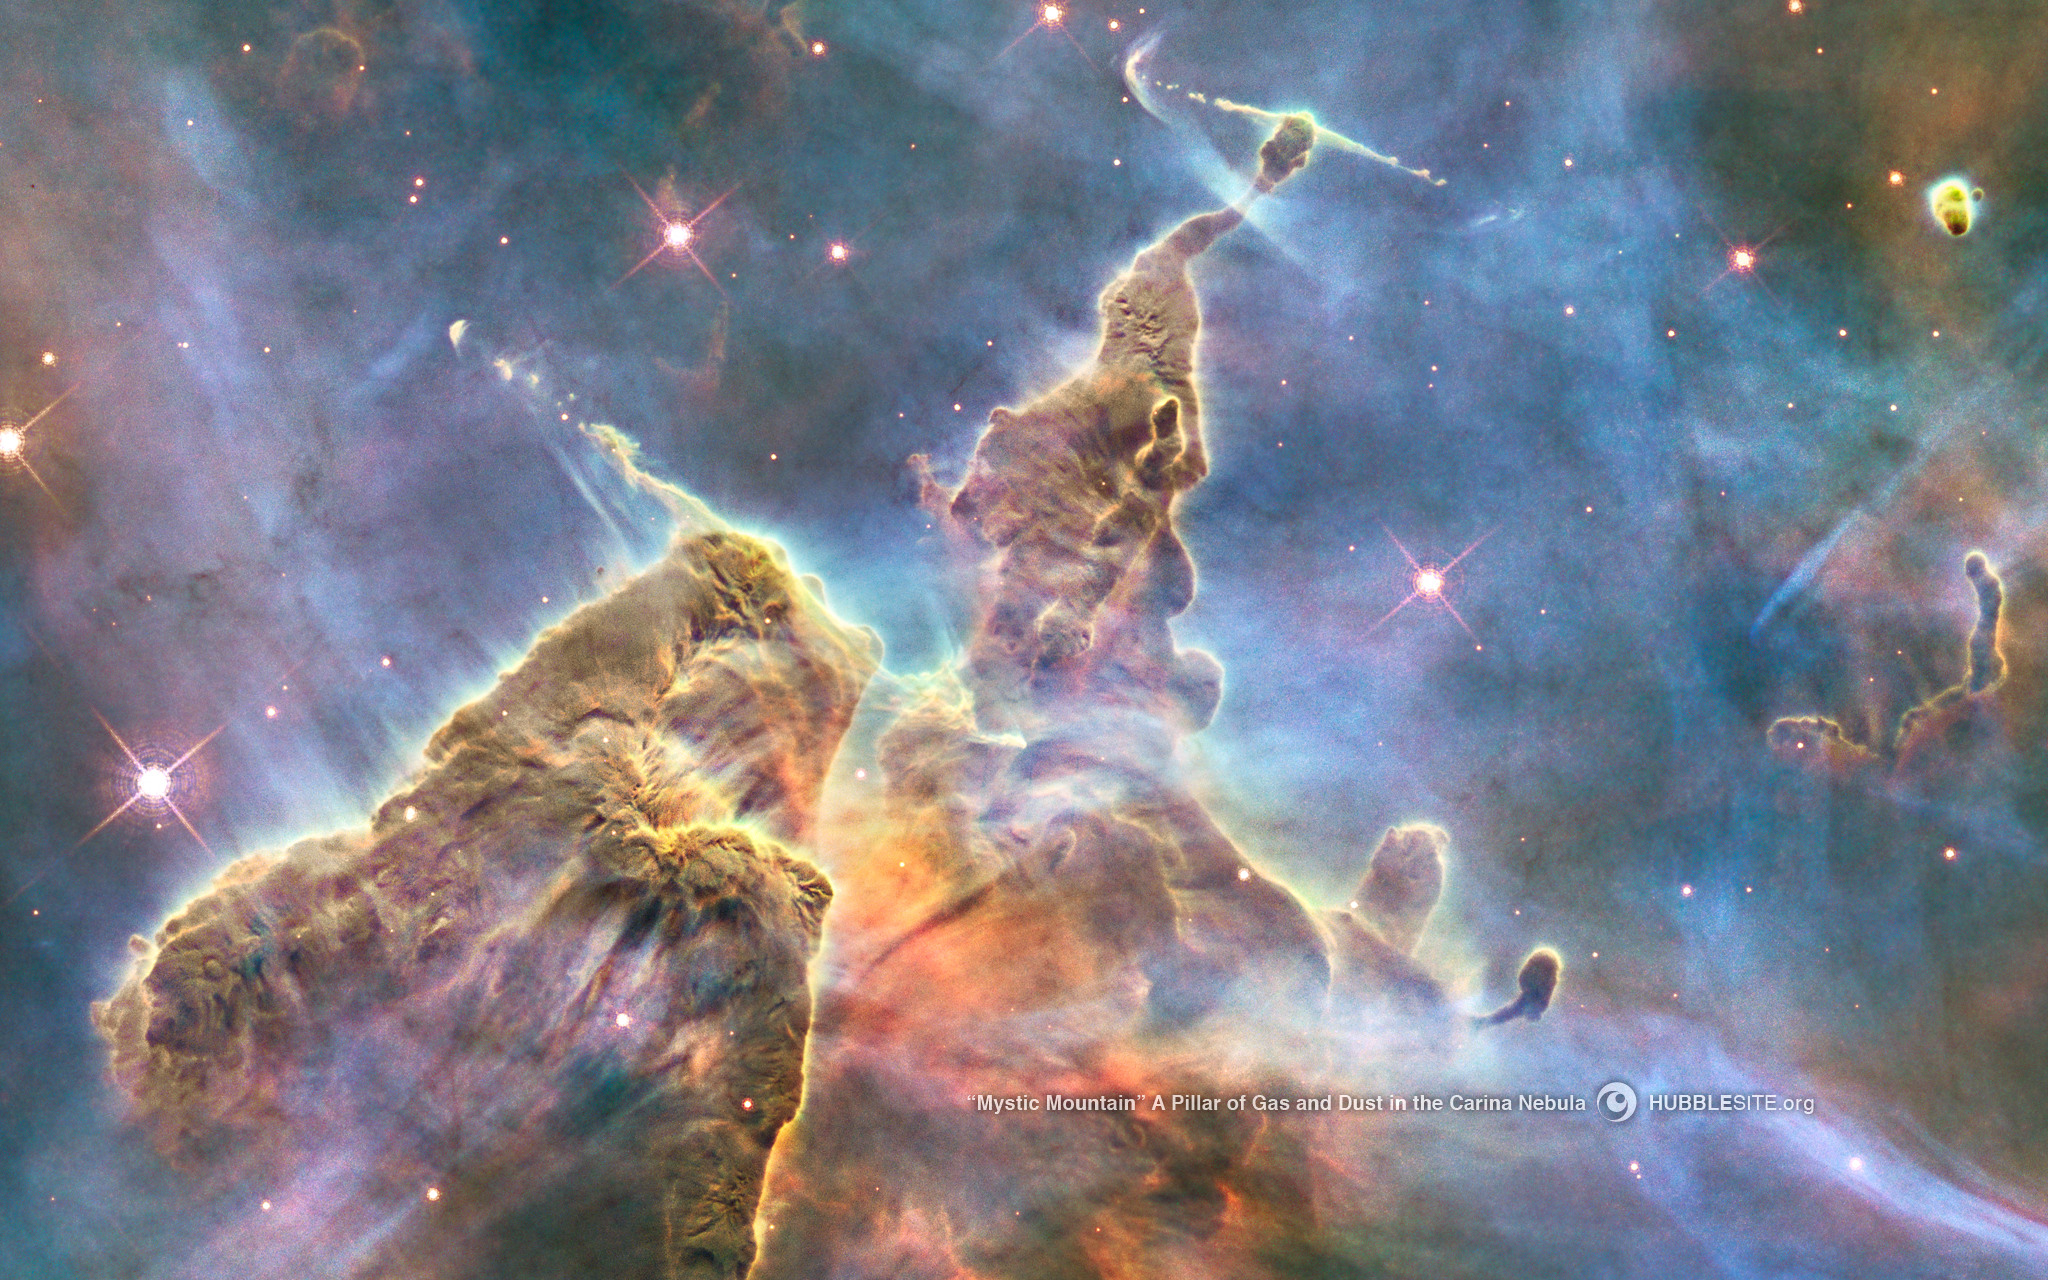 A Pillar of Gas and Dust in the Carina Nebula